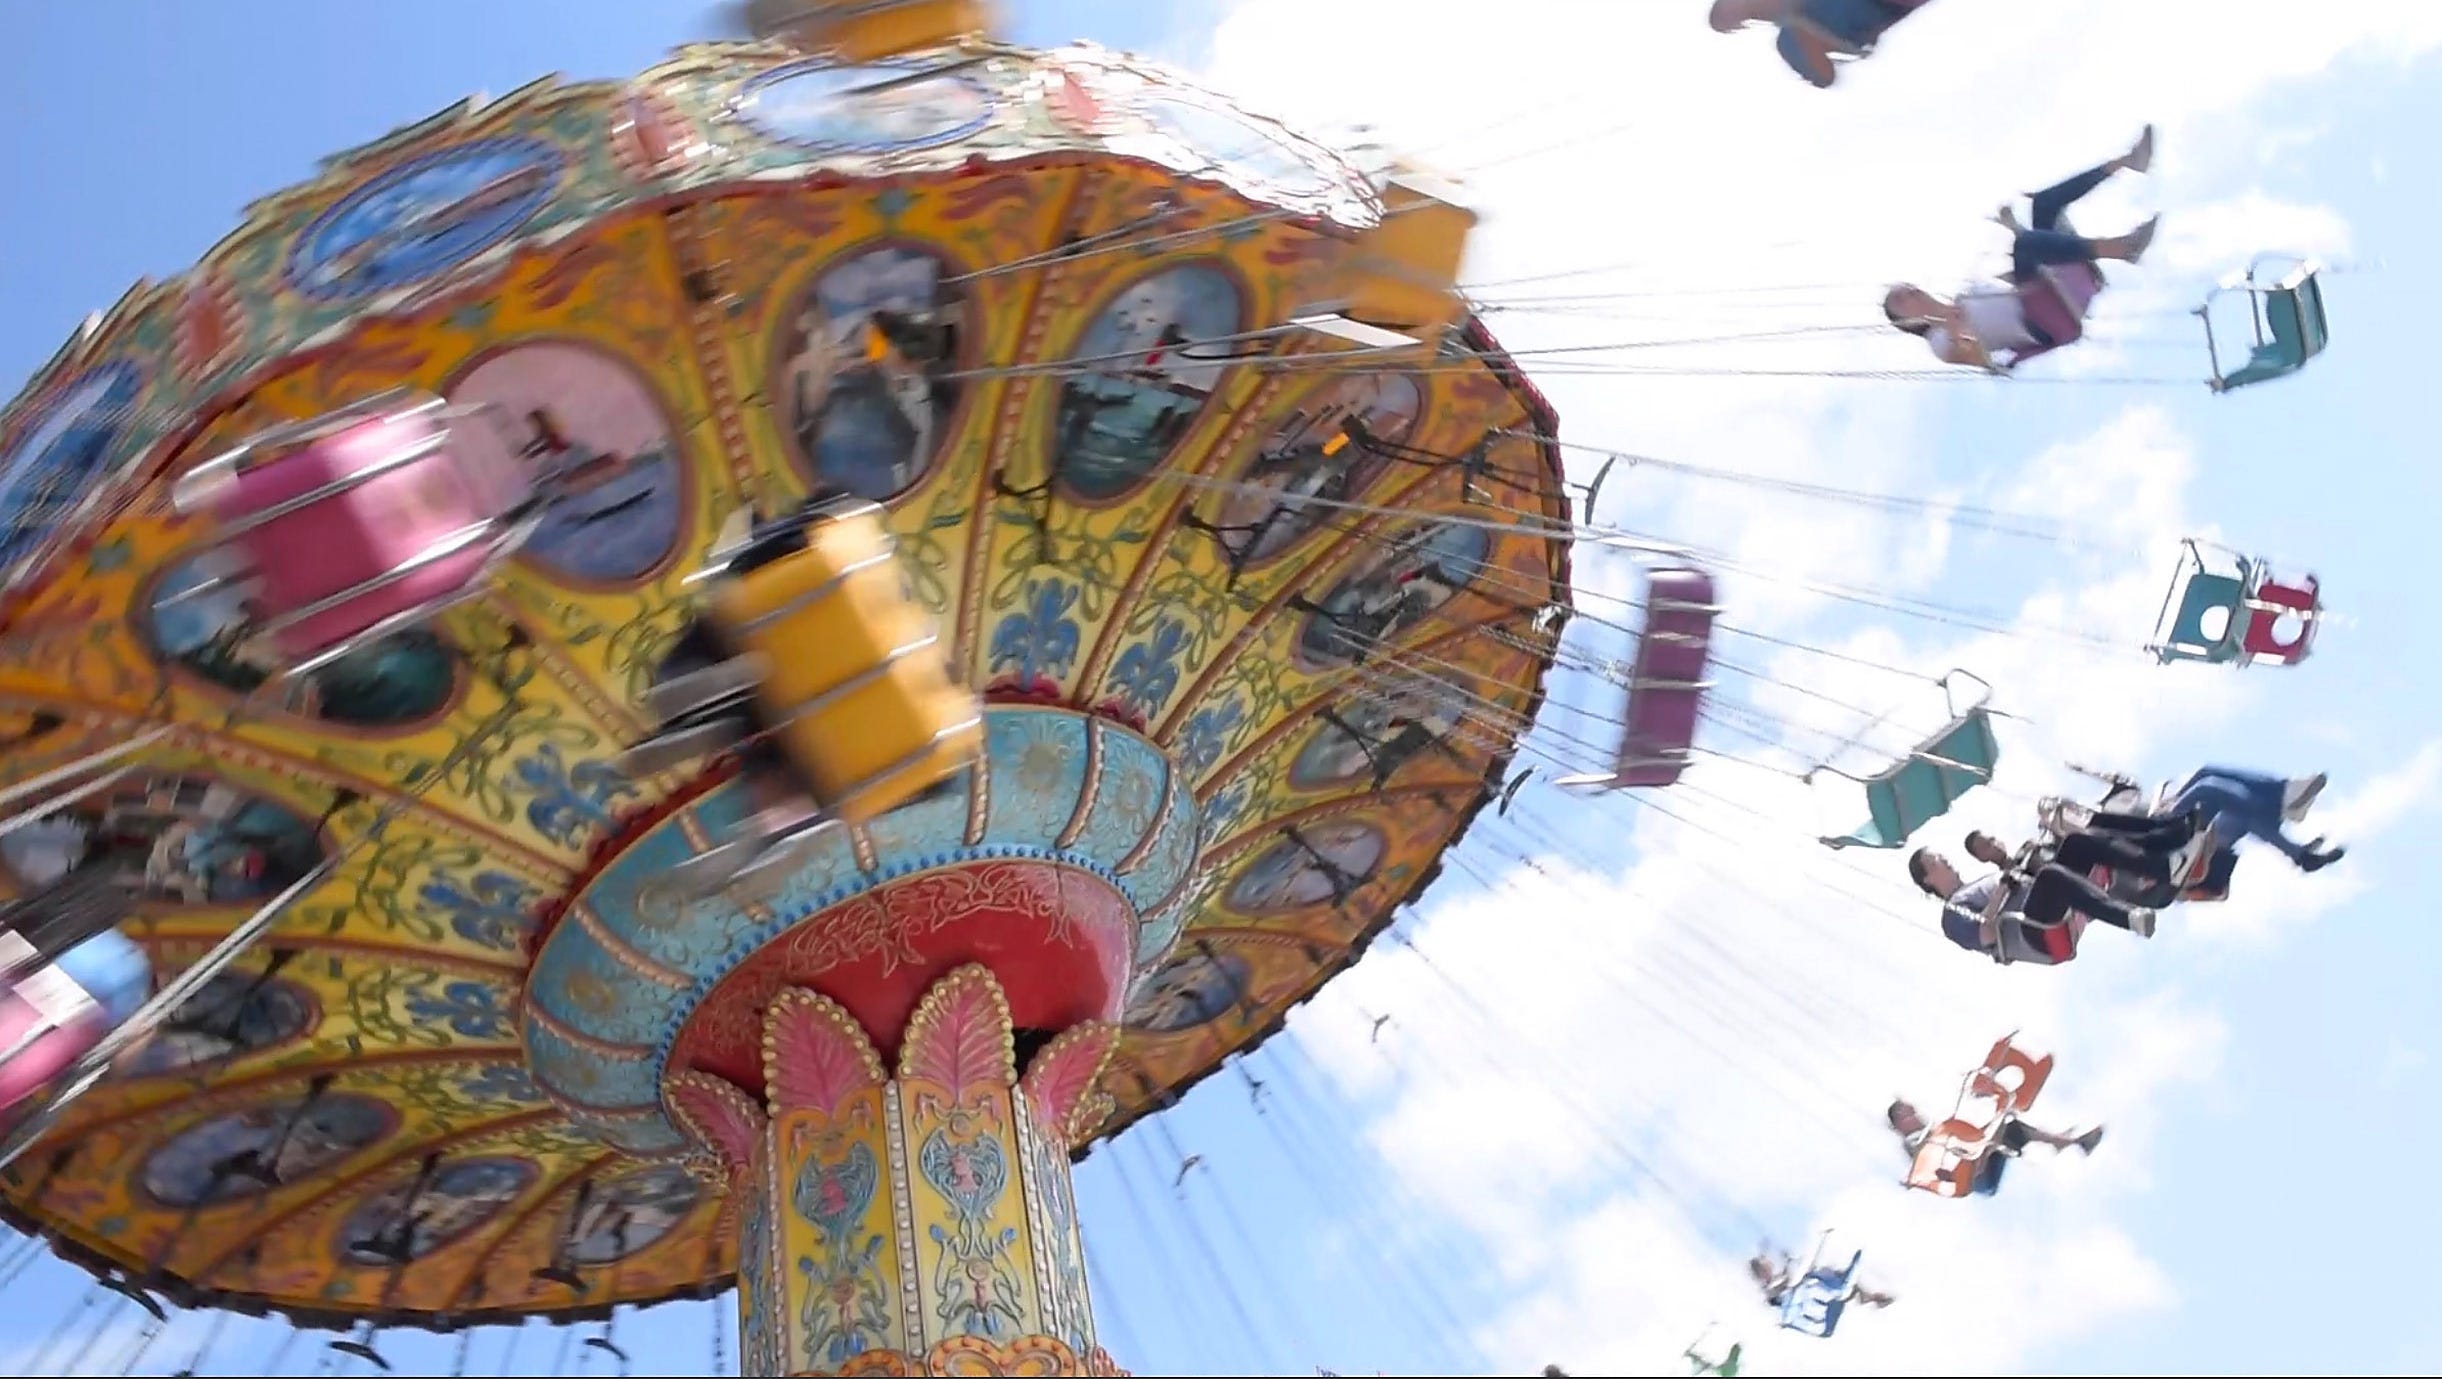 People ride the flying chairs at the Michigan State Fair.